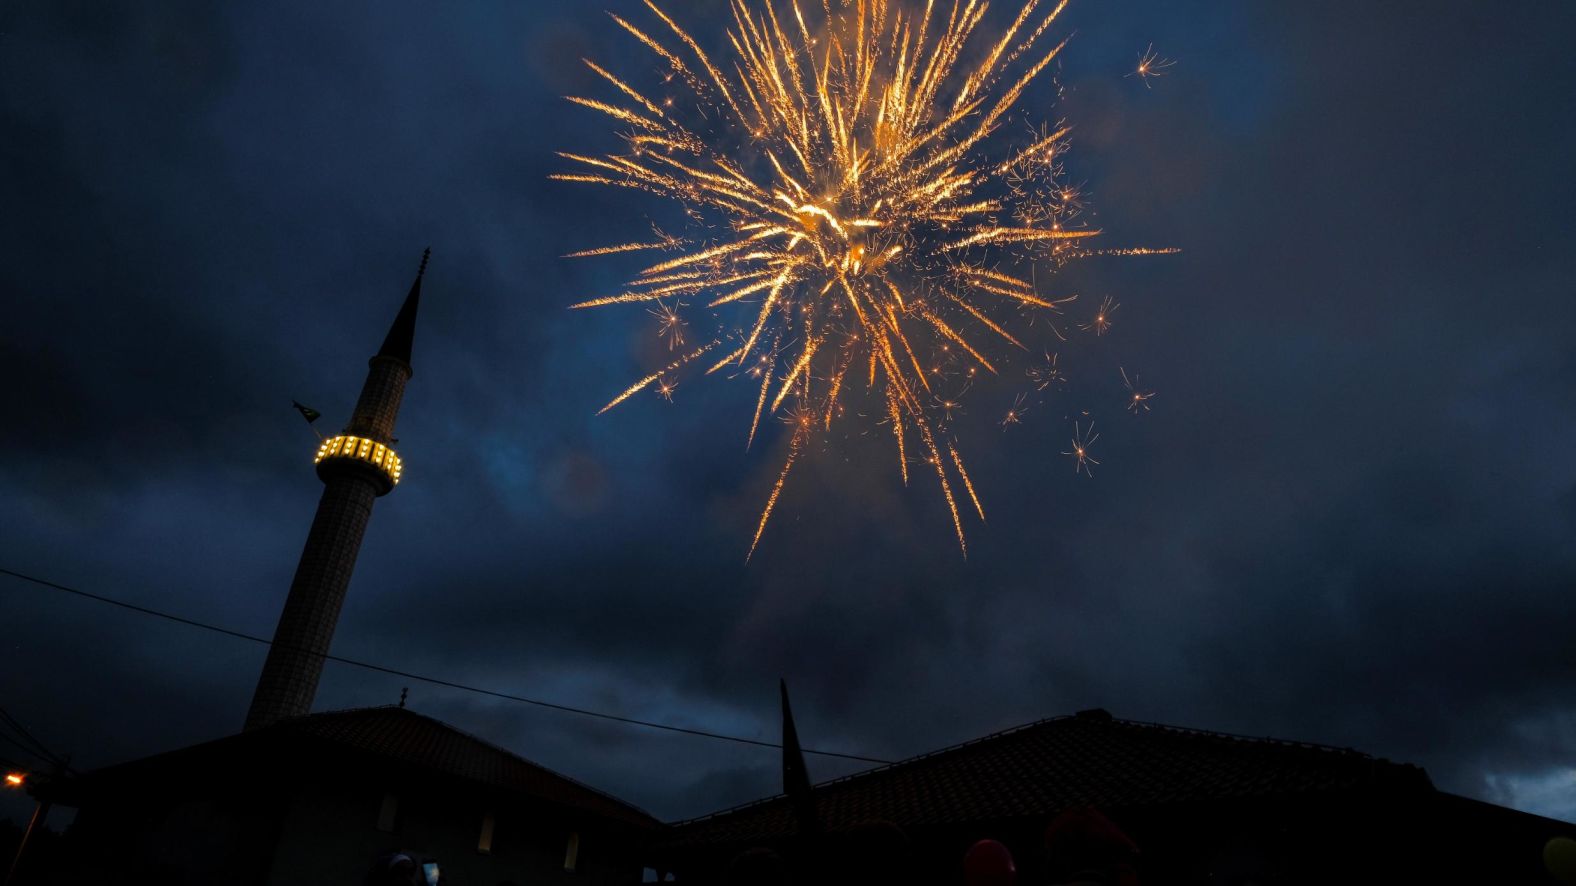 Fireworks light the night sky to mark the beginning of the Islamic holy month of Ramadan in Sarajevo, Bosnia and Herzegovina, on May 5.